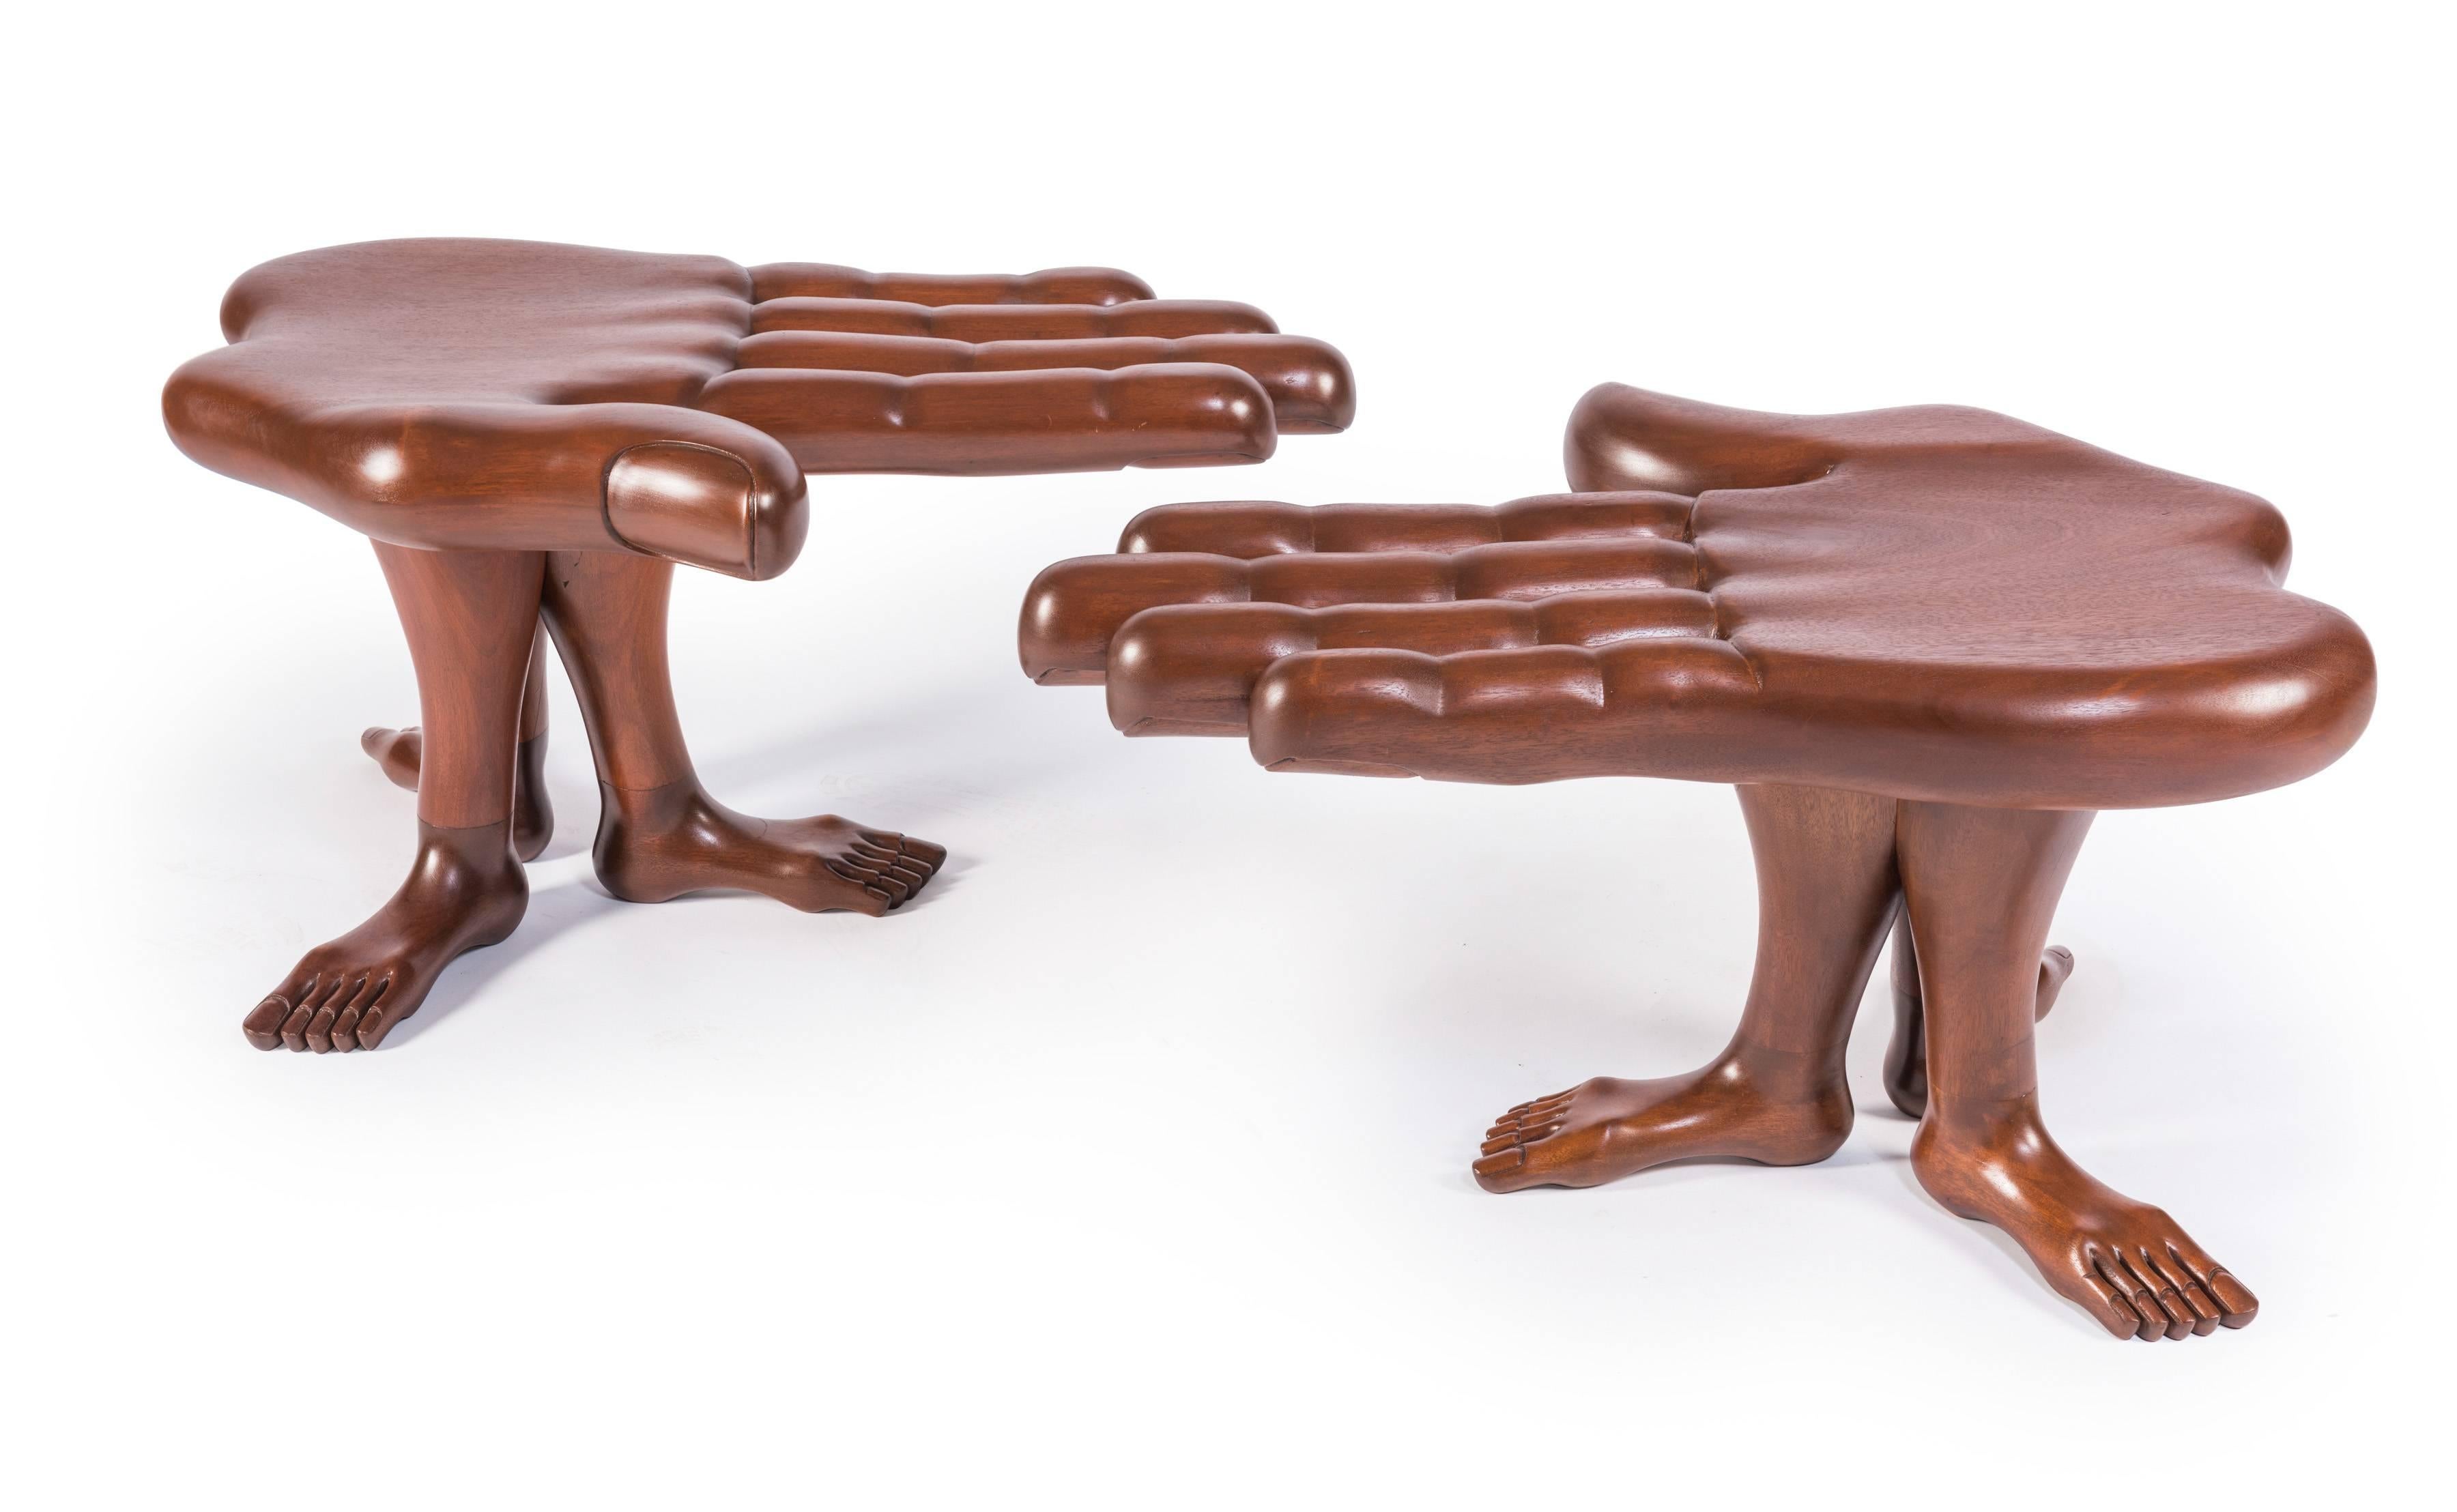 A rare pair of hand and foot tables or stools designed and made by Mexican Surrealist artist Pedro Friedeberg in his iconic hand and leg motifs. Made of laminated and blocked mahogany, this pair features a palm supported by three legs with with